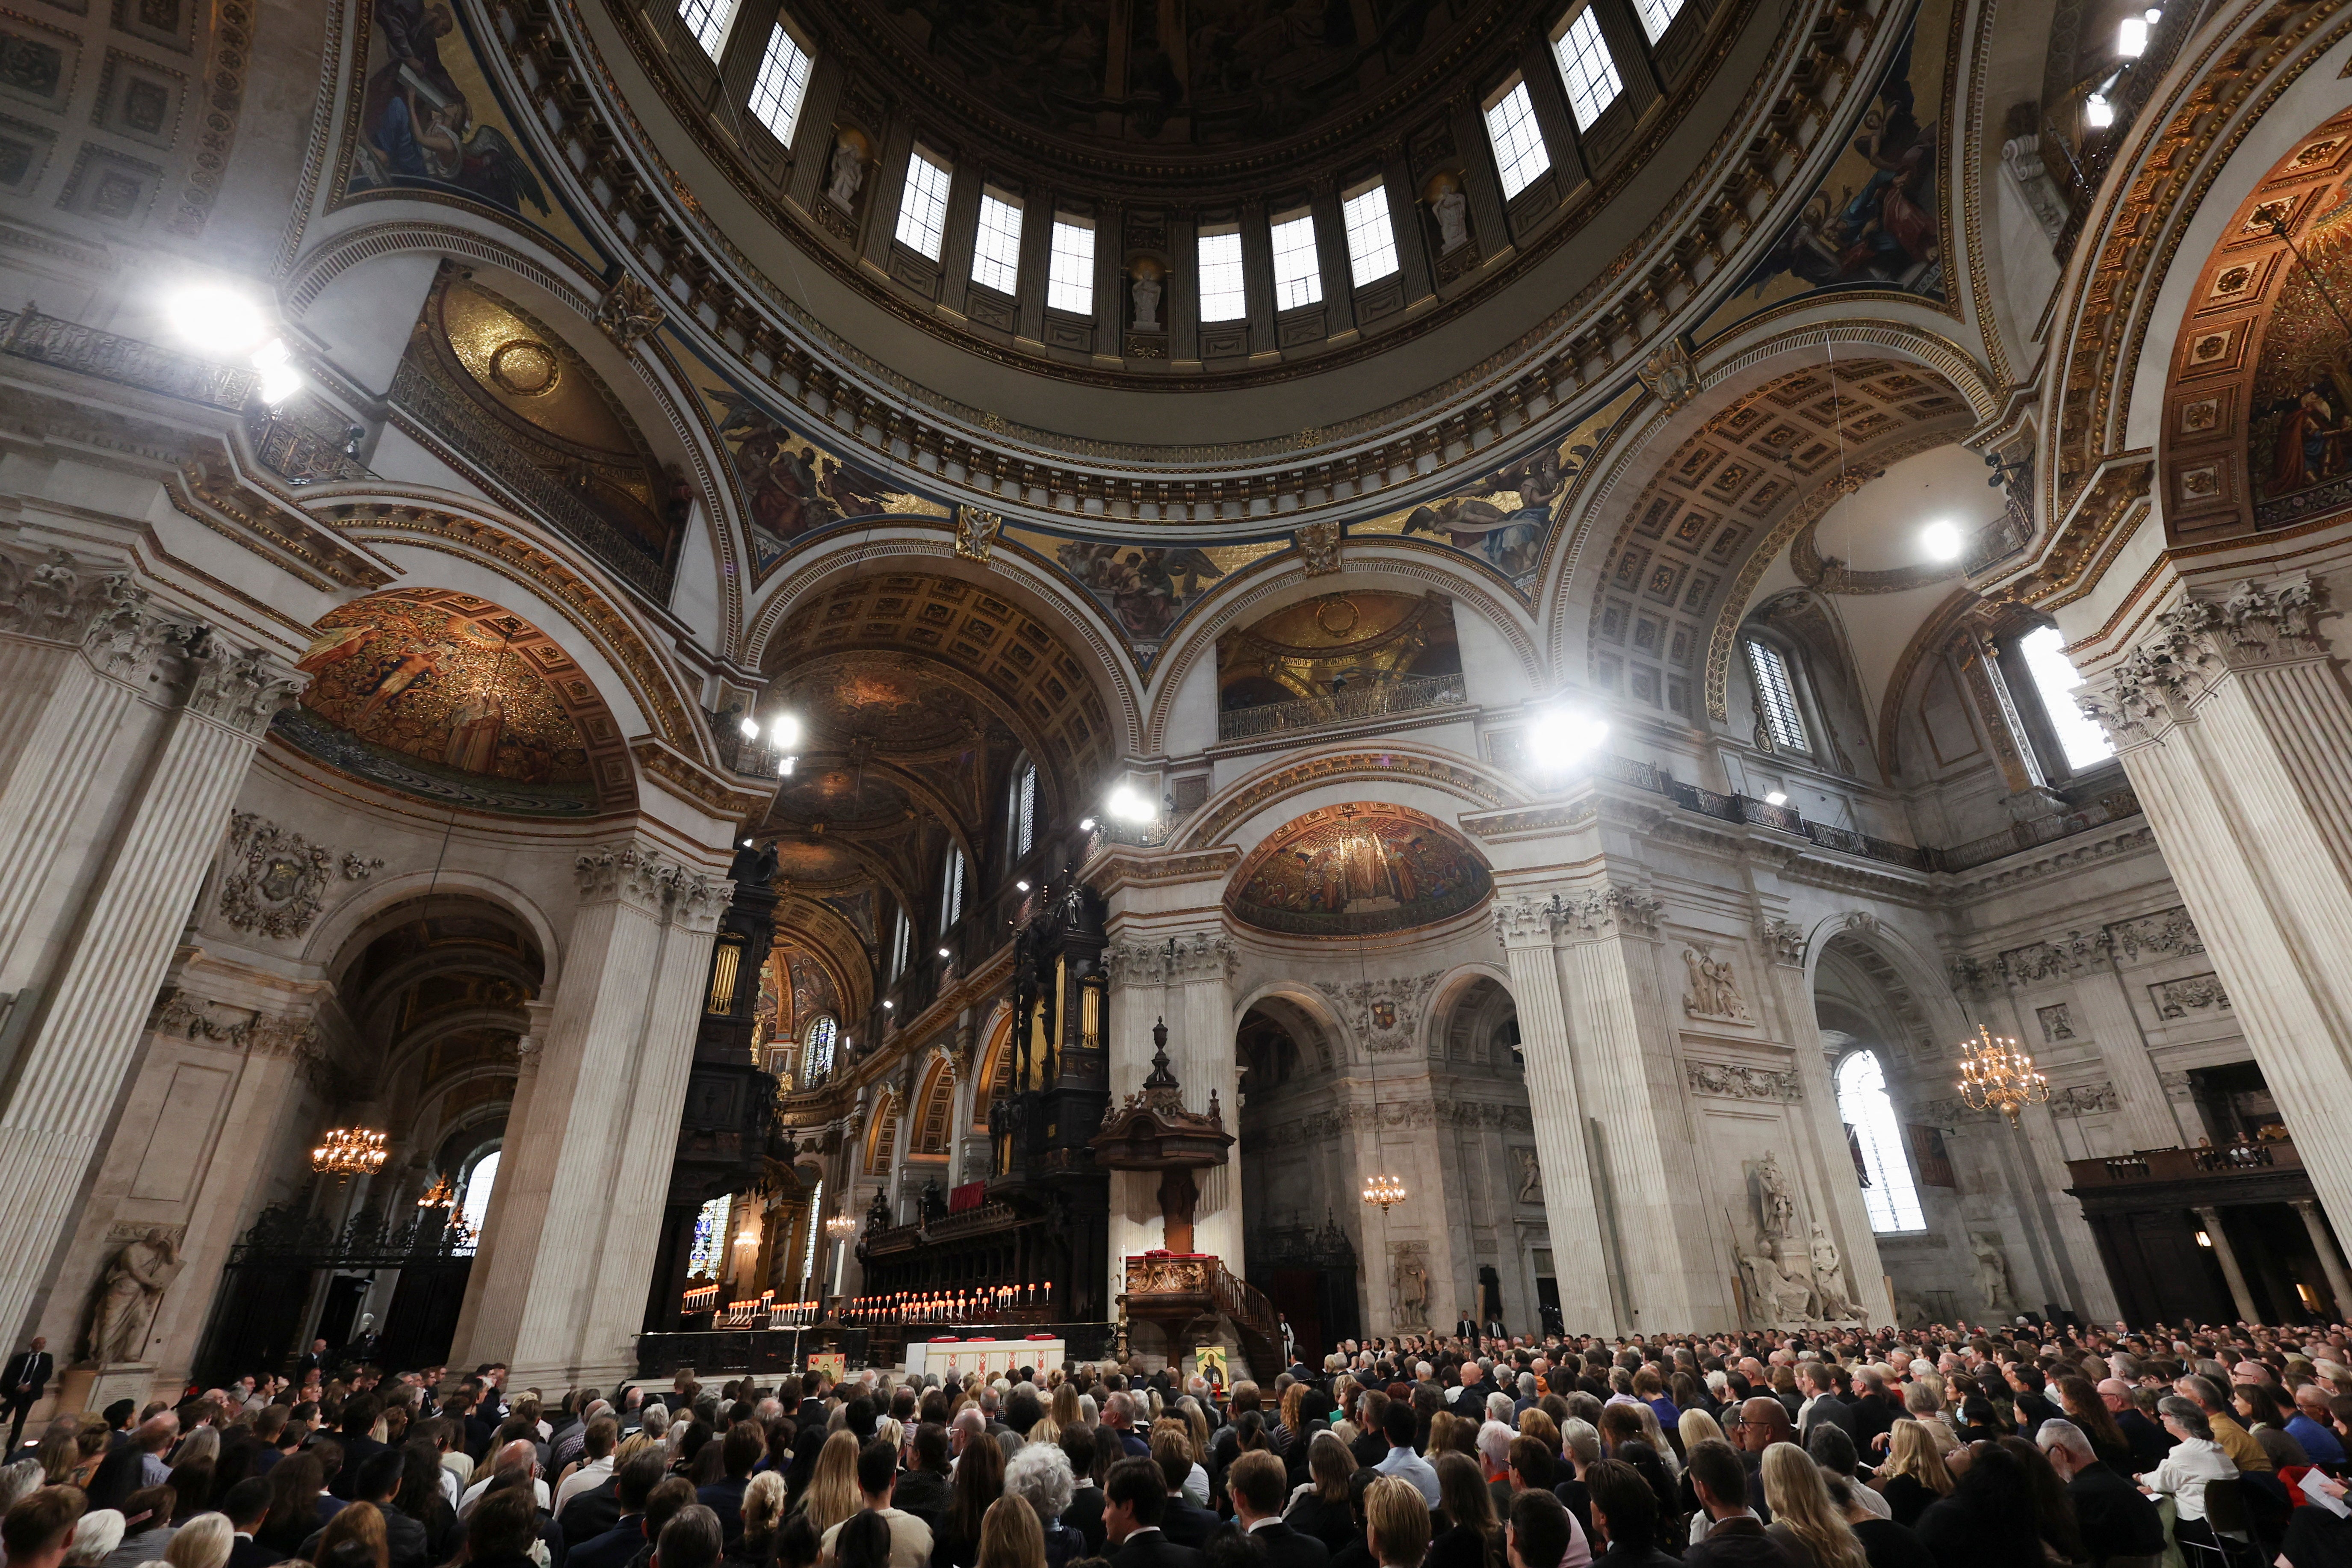 Around 2,000 people packed into the historic place of worship